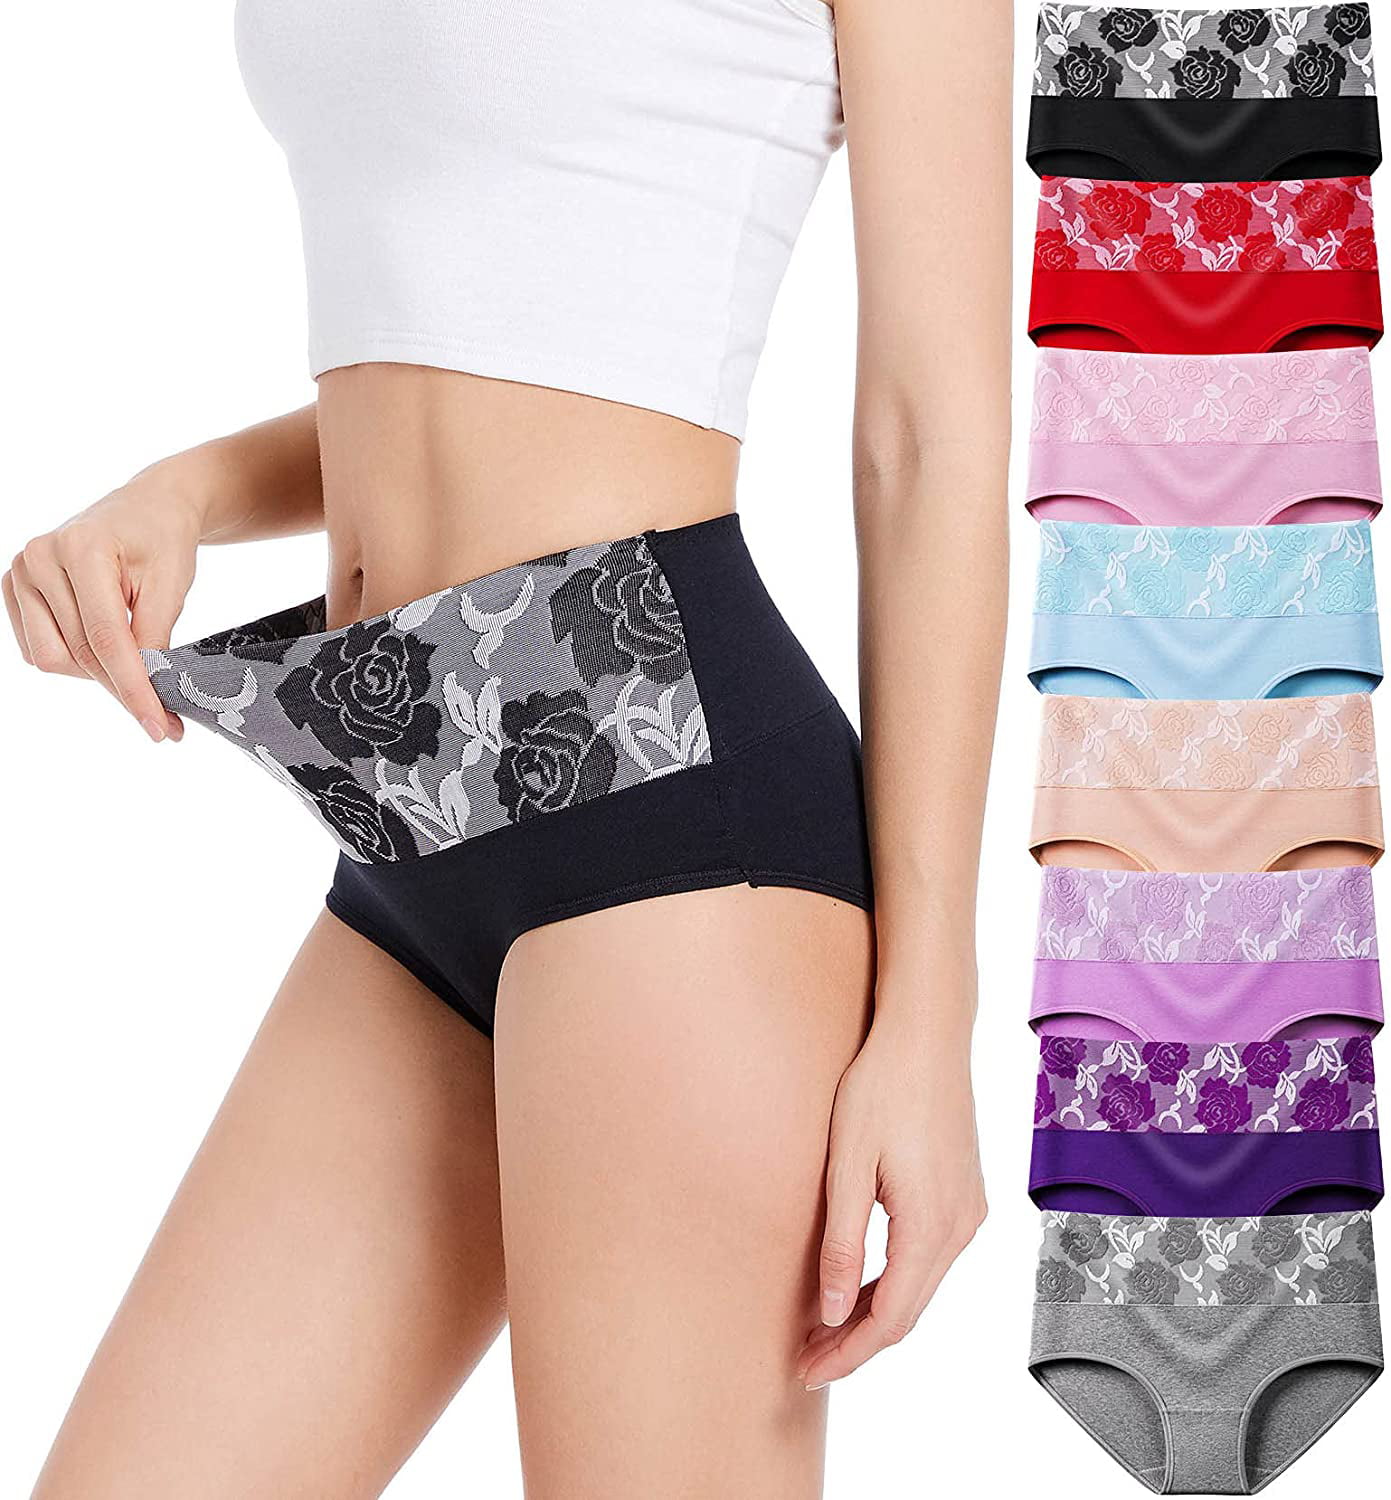 8 Pack High Waist Tummy Control Panties for Women, Cotton